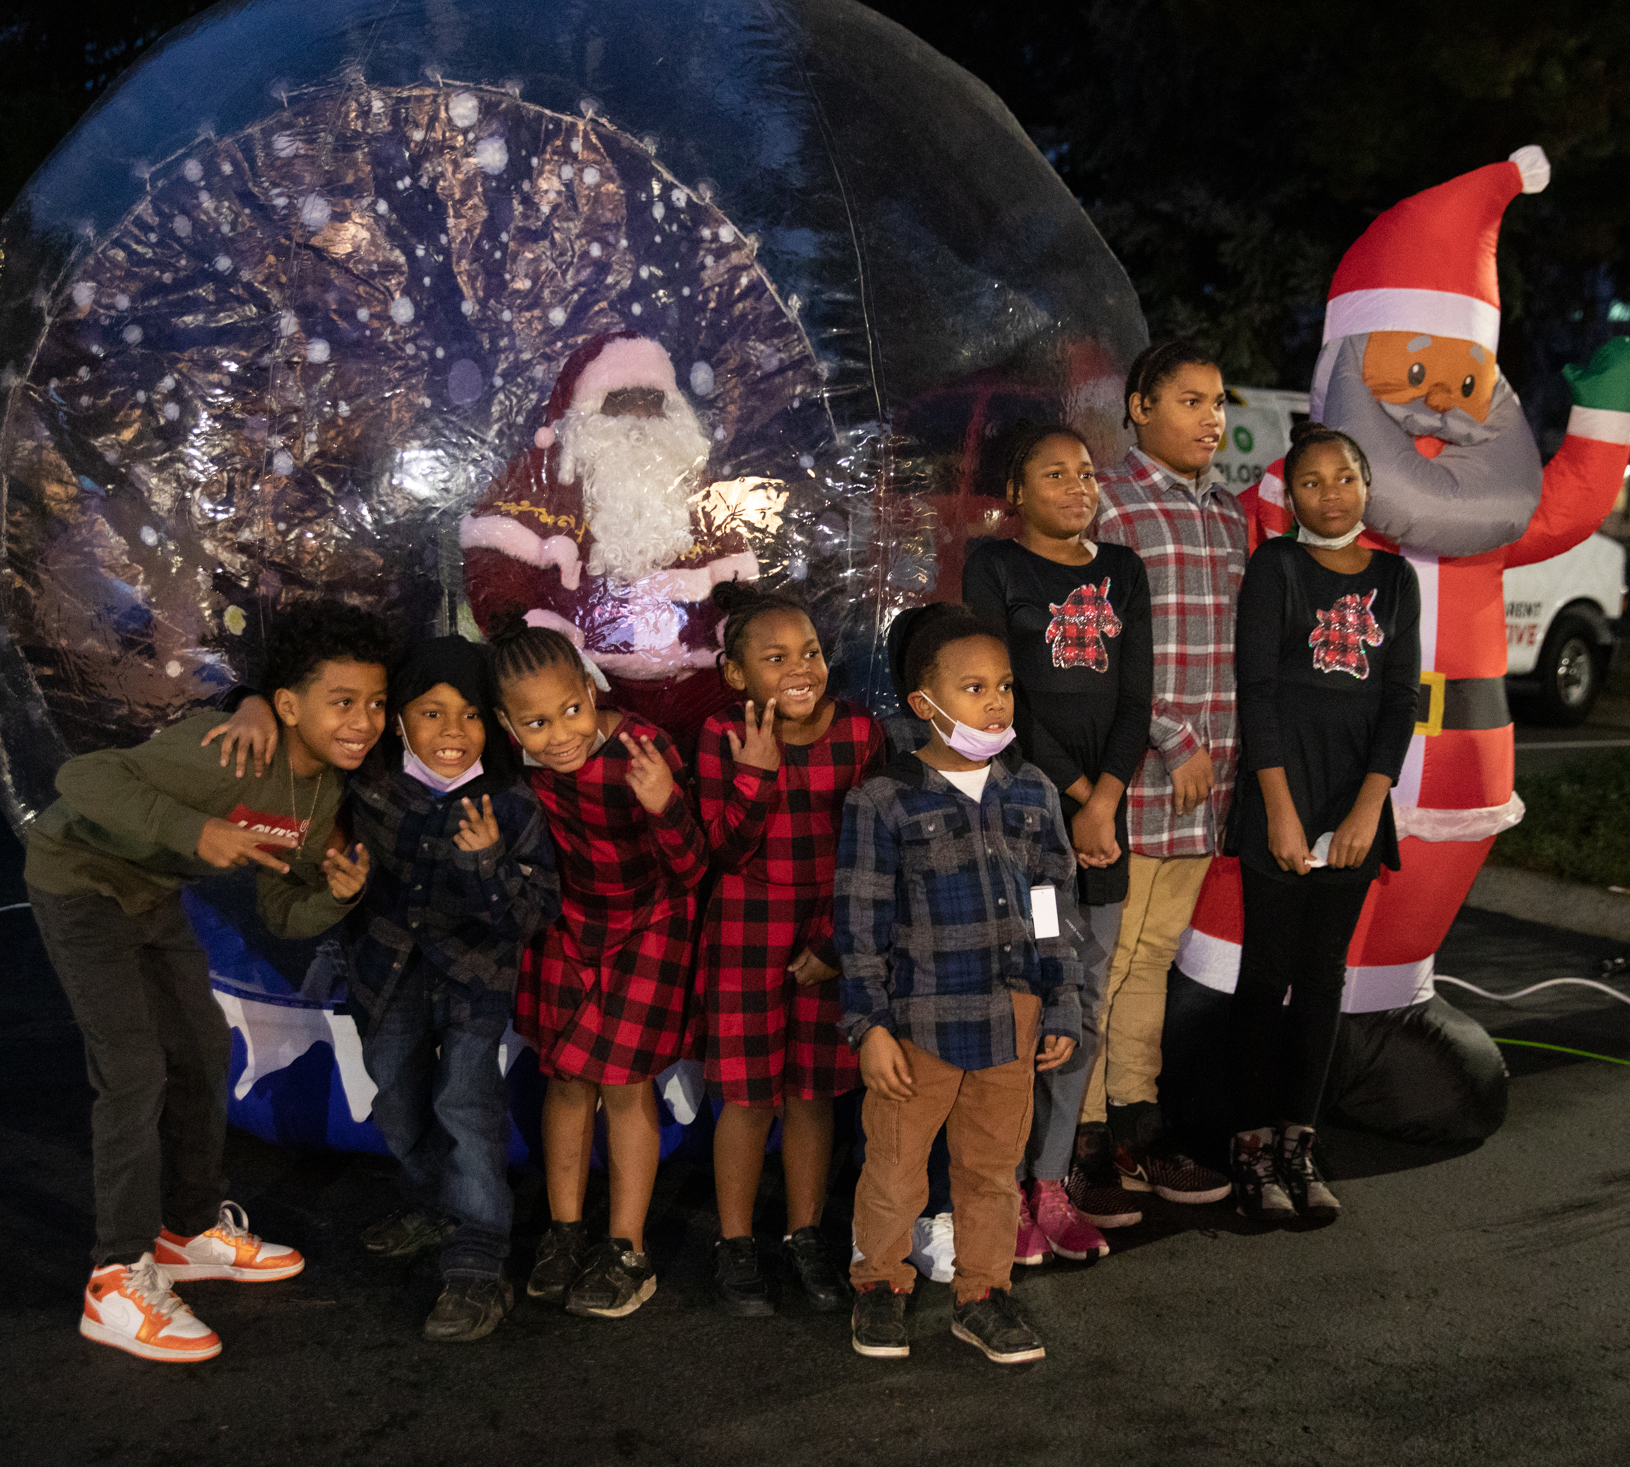 Photo of a group of children posing with Santa while he sits inside an inflatable snow globe.